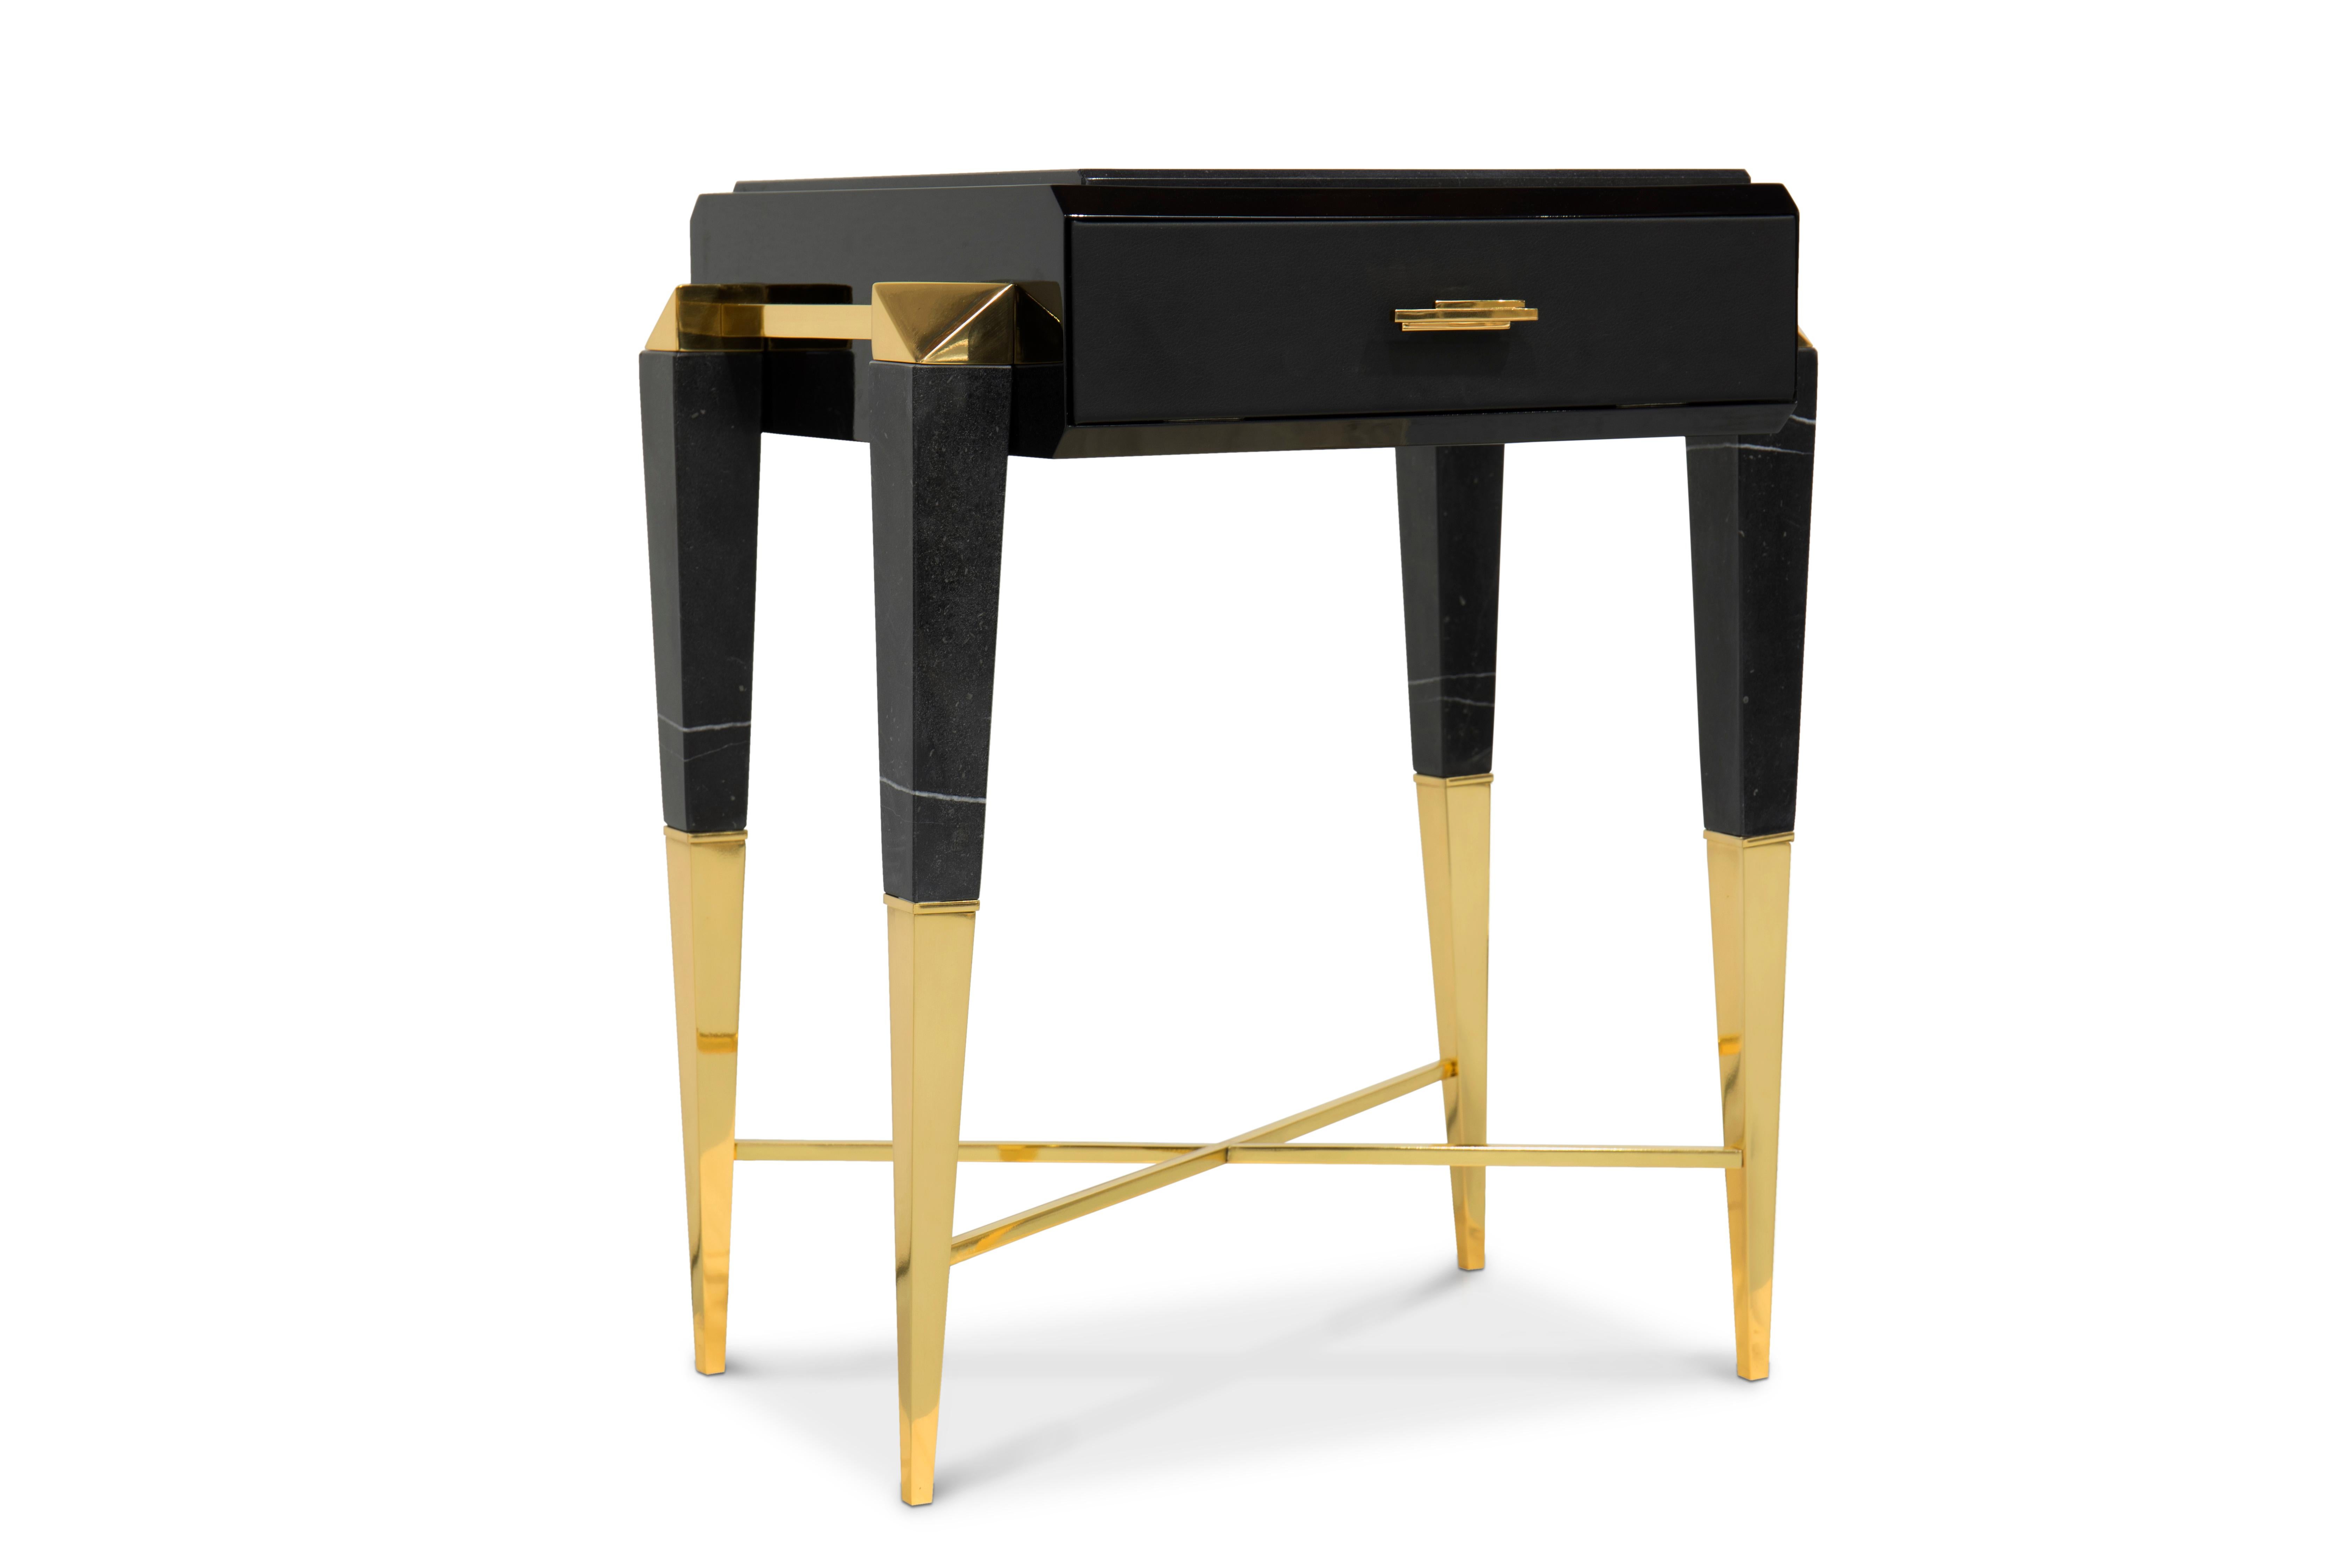 Inspired by Ancient Rome, the spear side table features a timeless design on which sleek gold plated lines support a rectangular platform made in Nero Marquina marble. The base is dramatically tapered allowing a beautiful intersected boundary. A